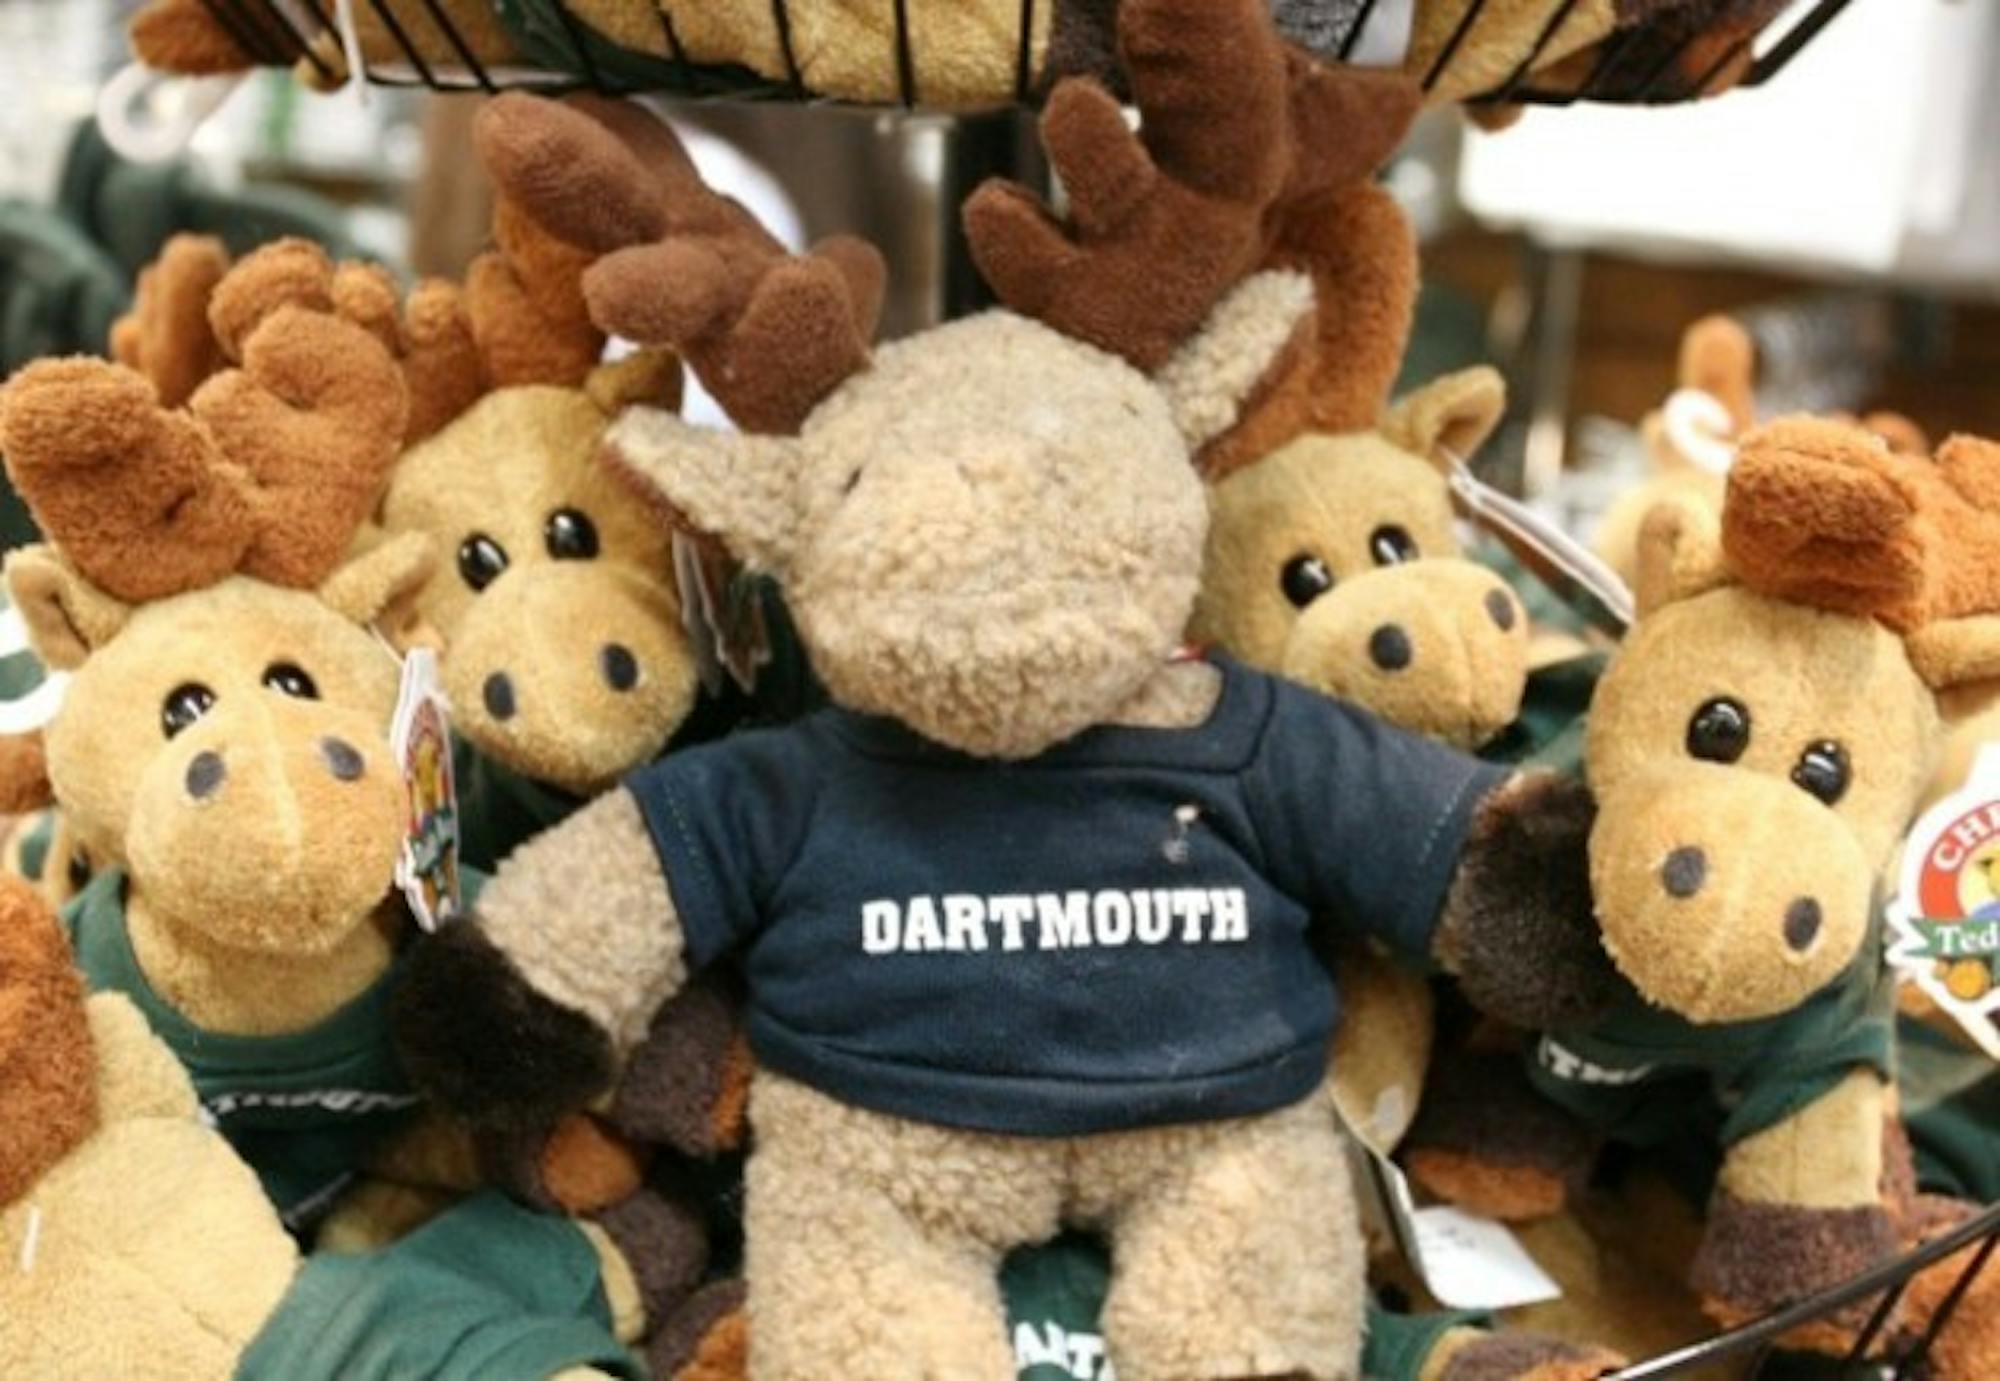 Dartmoose toys line shelves at the Dartmouth Co-op. Student Assembly is attempting to institute the Dartmoose as the College's official mascot.